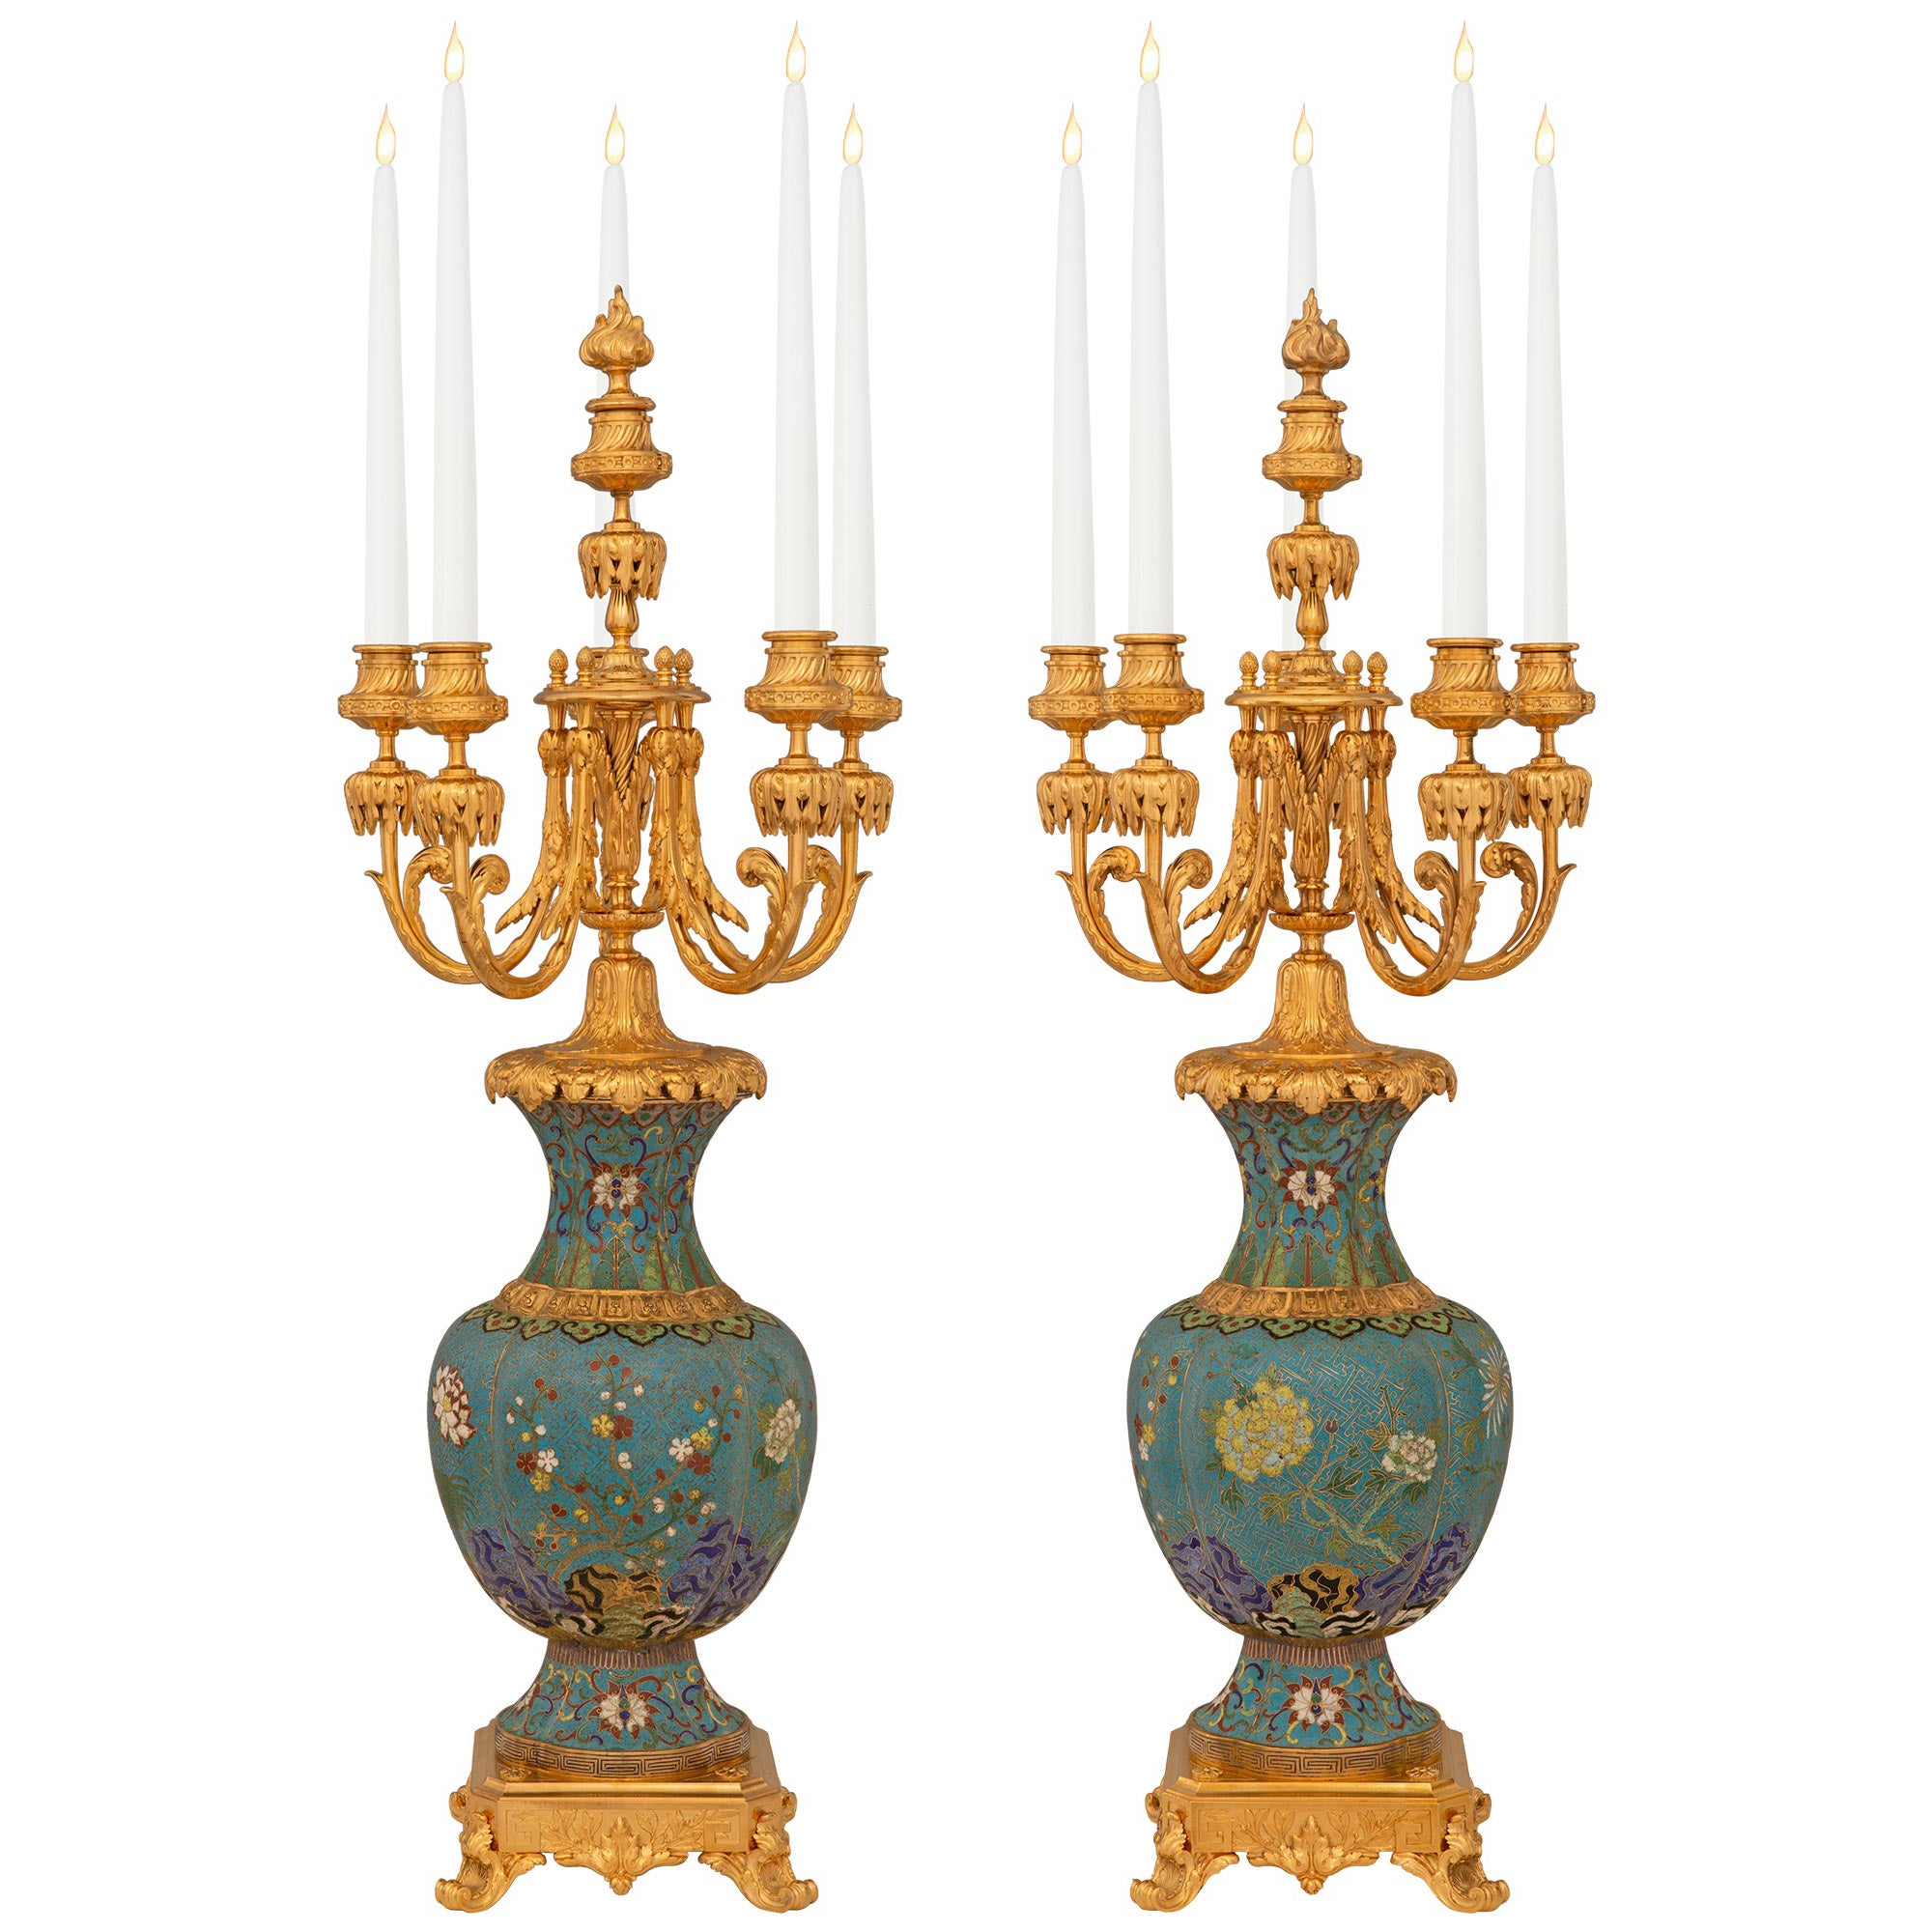 Pair Of French 19th Century Louis XV St. Cloisonné And Ormolu Candelabras For Sale